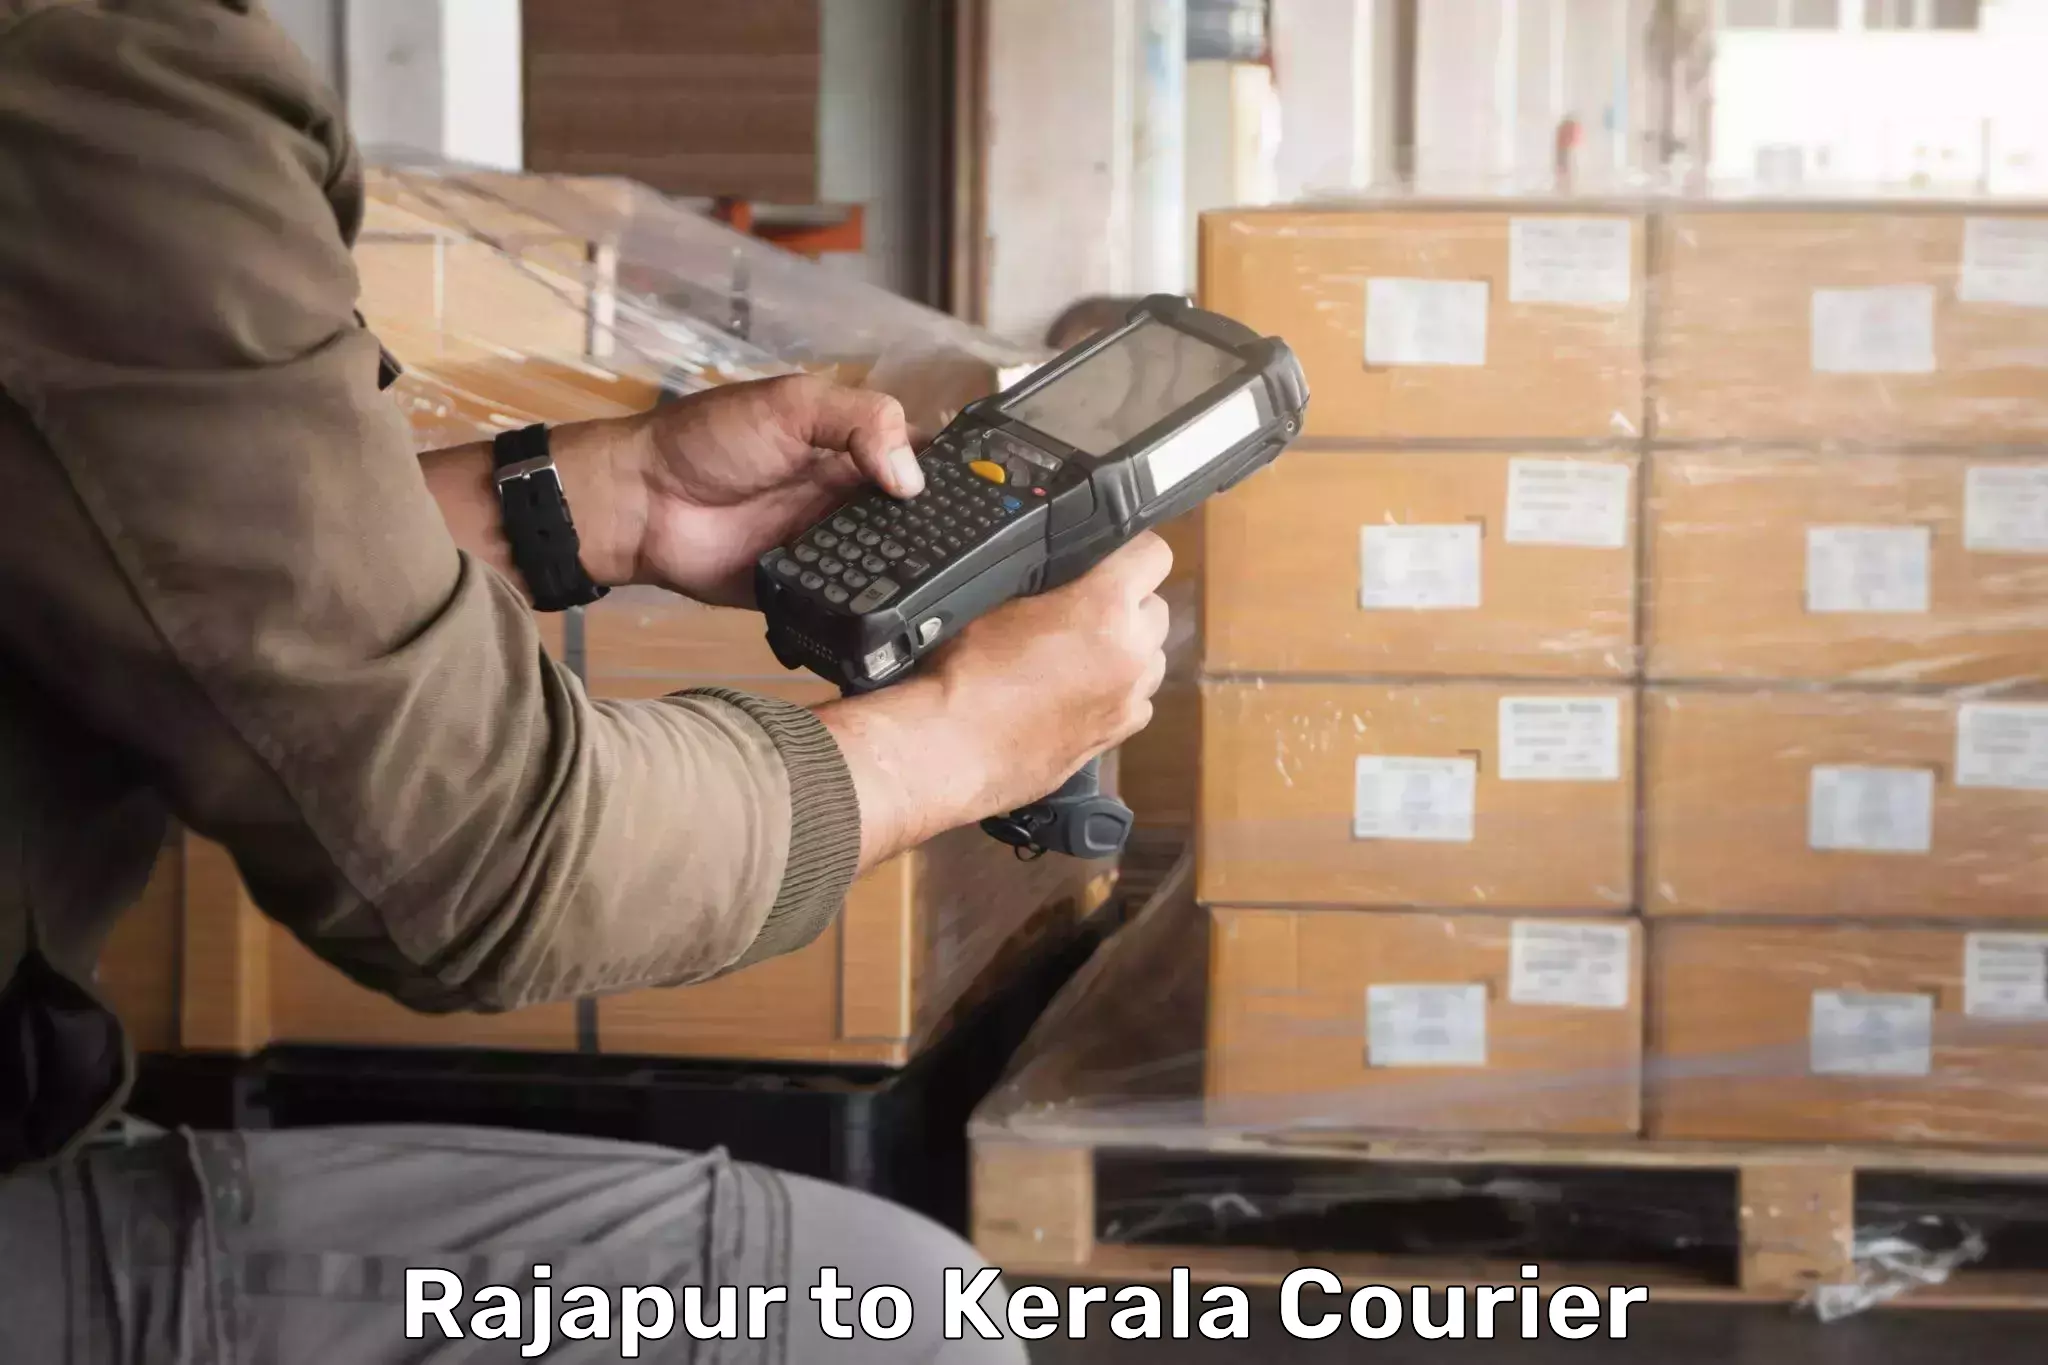 24-hour courier service Rajapur to Kollam